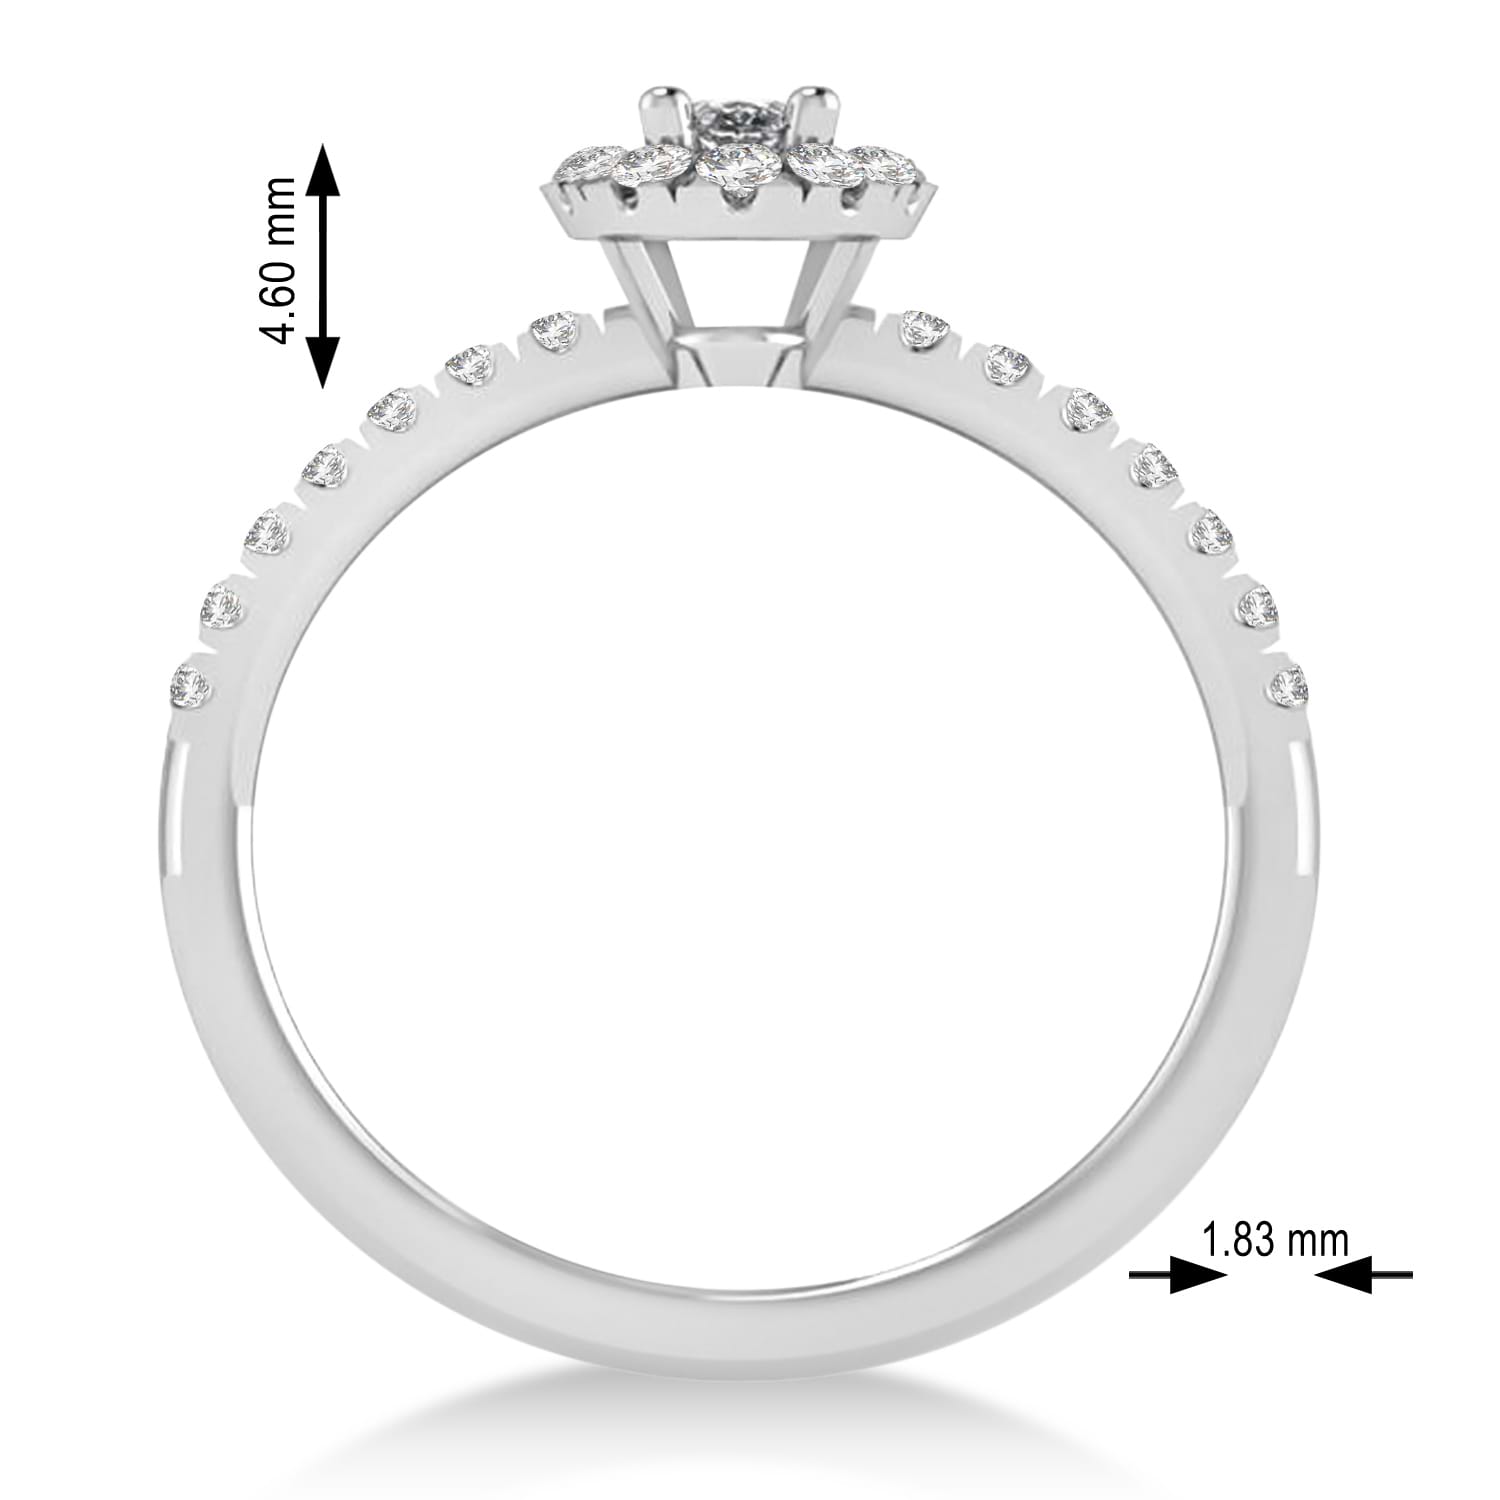 Oval Lab Grown Diamond Halo Engagement Ring 14k White Gold (0.60ct)